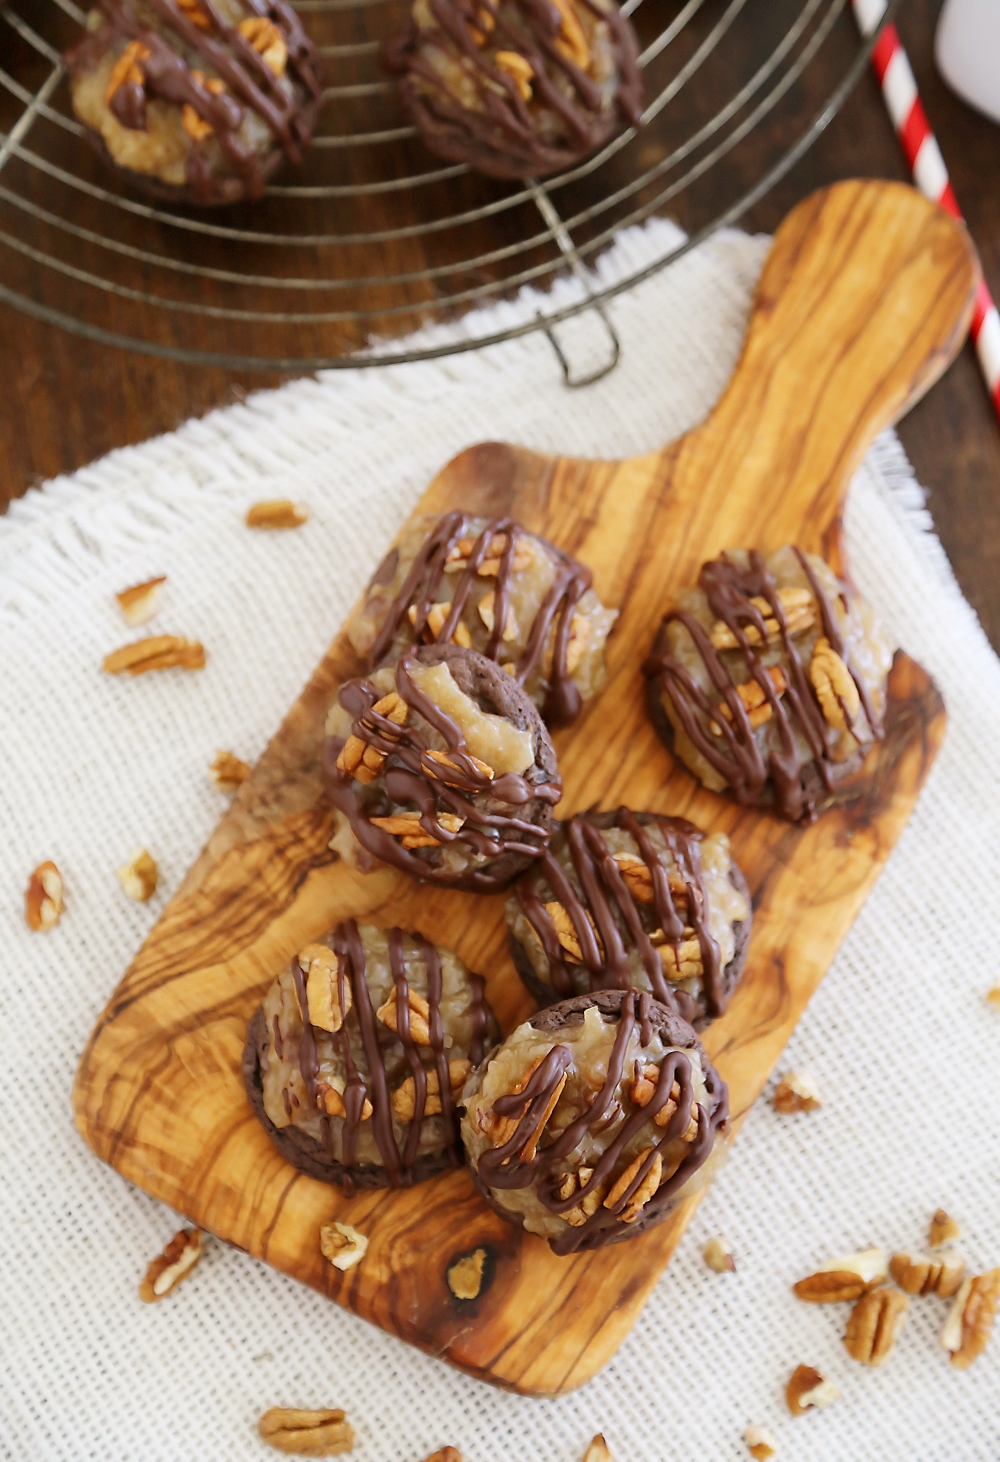 Gooey German Chocolate Cake Cookies - Rich, chocolaty cookies topped with decadent caramel-coated pecans, coconut and chocolate chips! Thecomfortofcooking.com